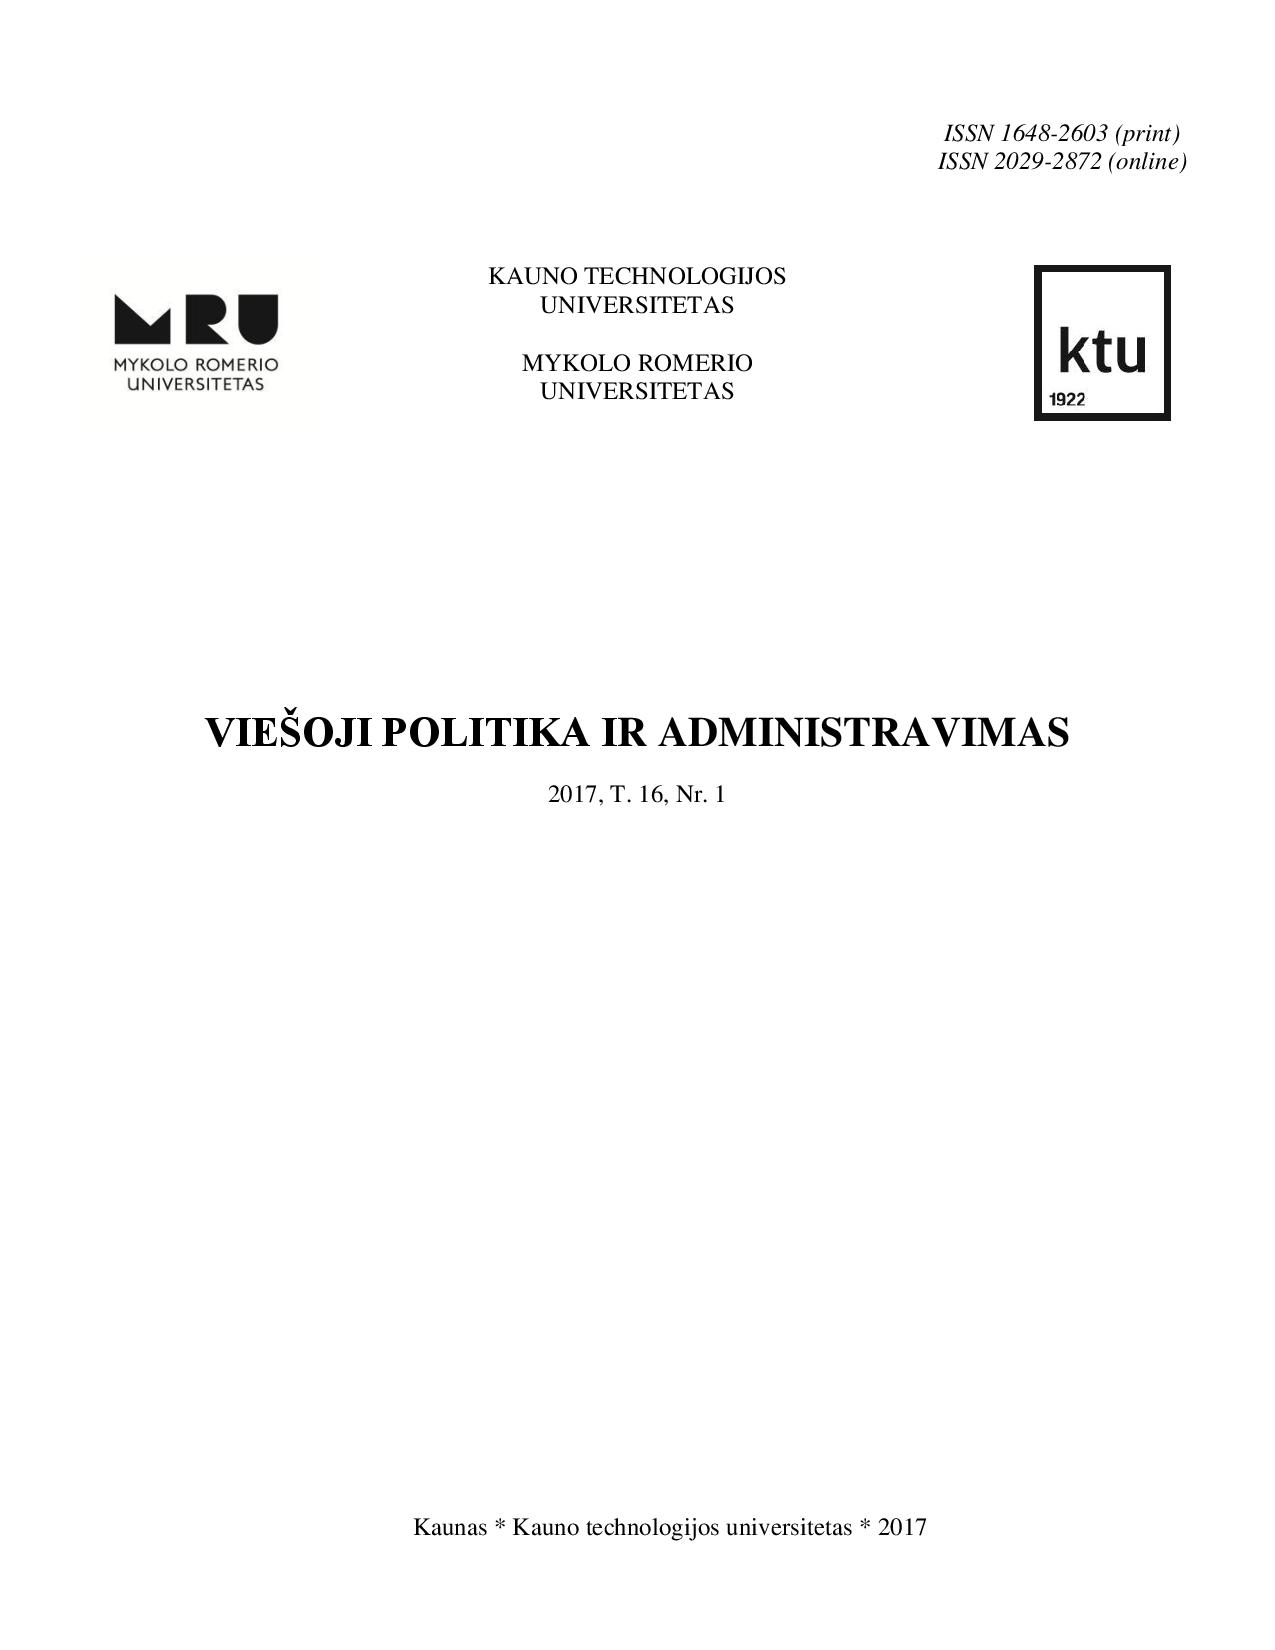 Partnership of Non-governmental Organizations and Local Government Agencies in the Implementation of Family Policy: A Case of Kaunas City Municipality Cover Image